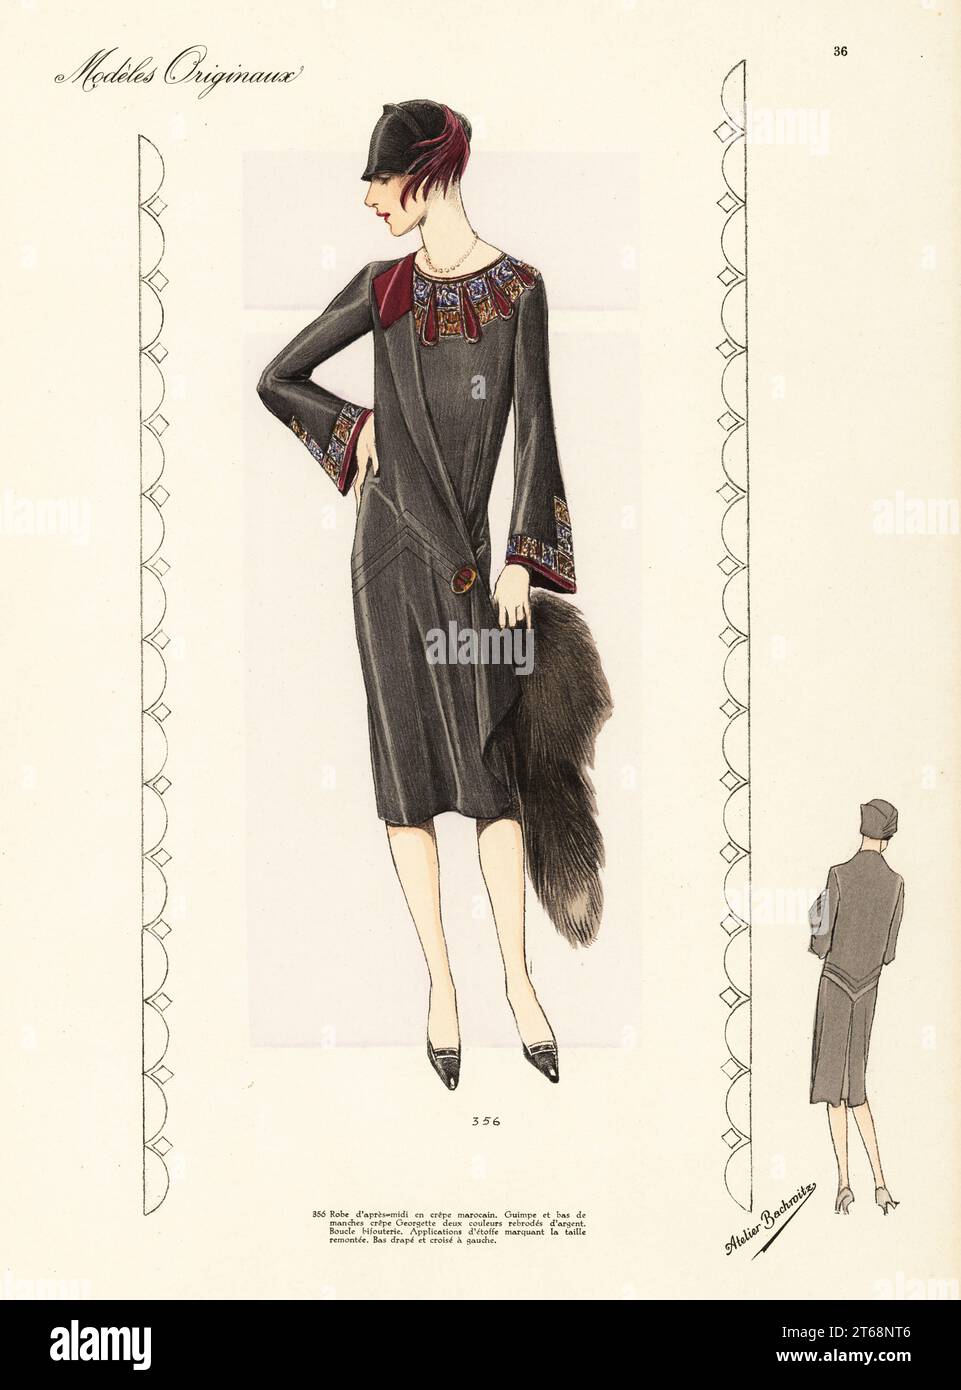 Afternoon dress of grey Moroccan crepe, collar and cuffs in two-colour crepe Georgette embroidered in silver. Cloche hat with feather. Toilette d'apres-midi en crepe marocain. Handcoloured lithograph from Beaux-Arts des Modes: Modeles Originaux, Hiver 1928 (Fashions of Fine Arts: Original Models, Winter 1928), Publisher Chic Parisien, Atelier Bachwitz, Paris, Volume 6, Number VII, November 1927. Stock Photo